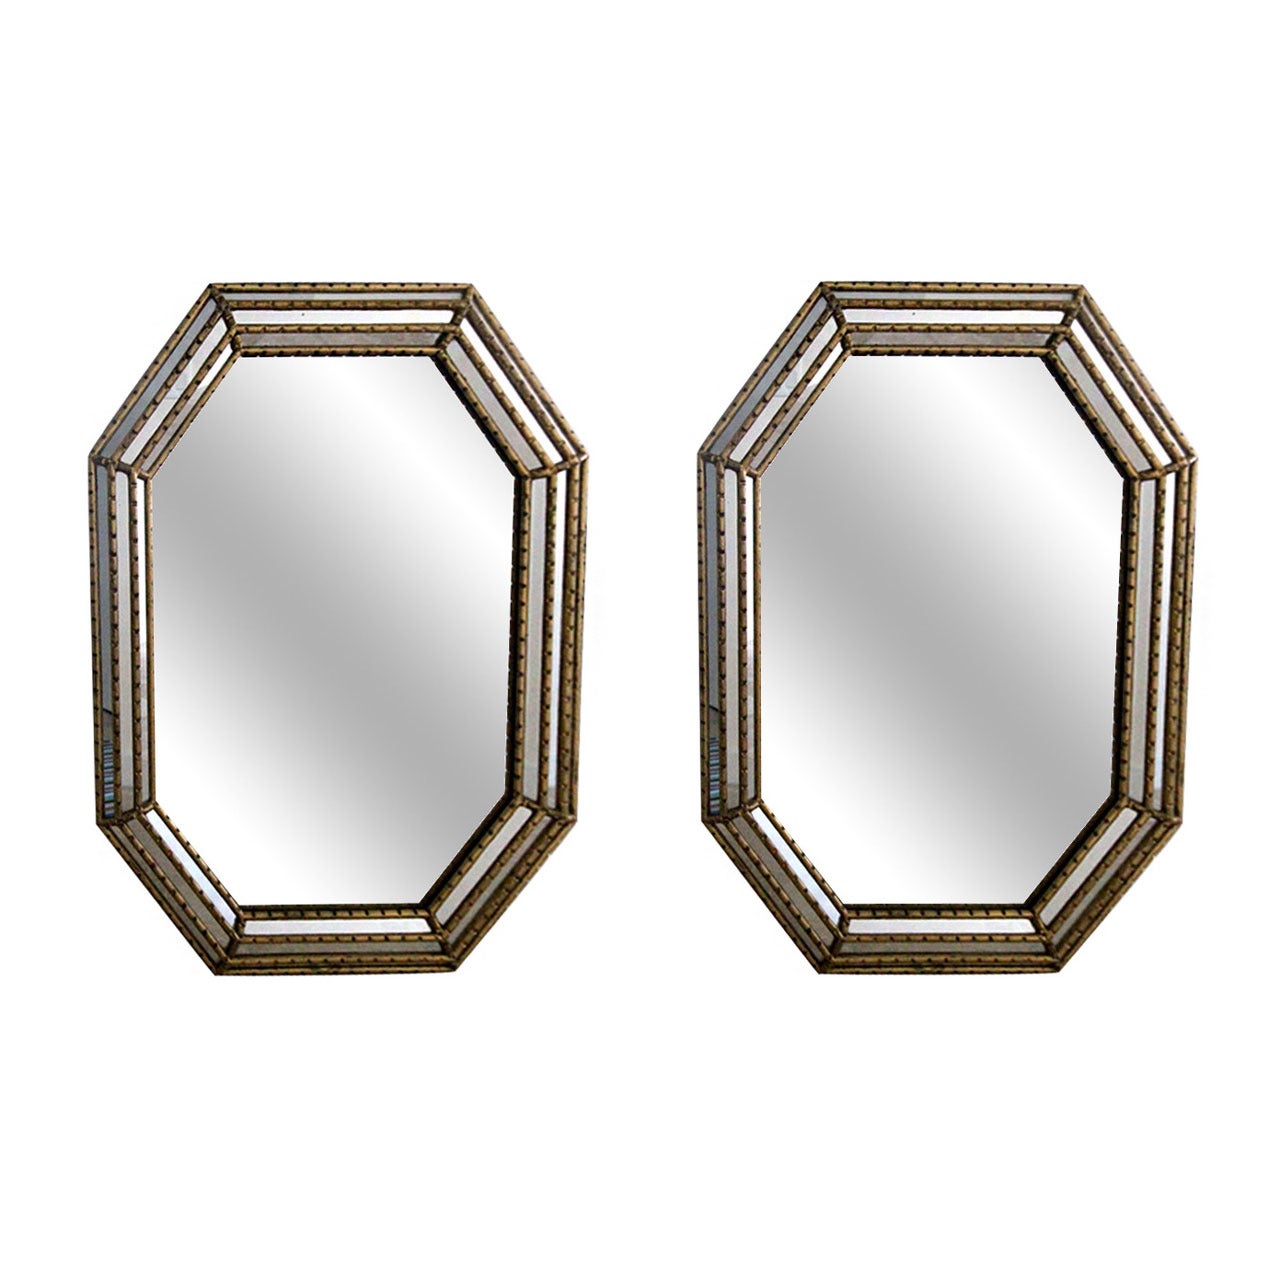 A pair of Large Vintage La Barge Mirror with Gilt Frame